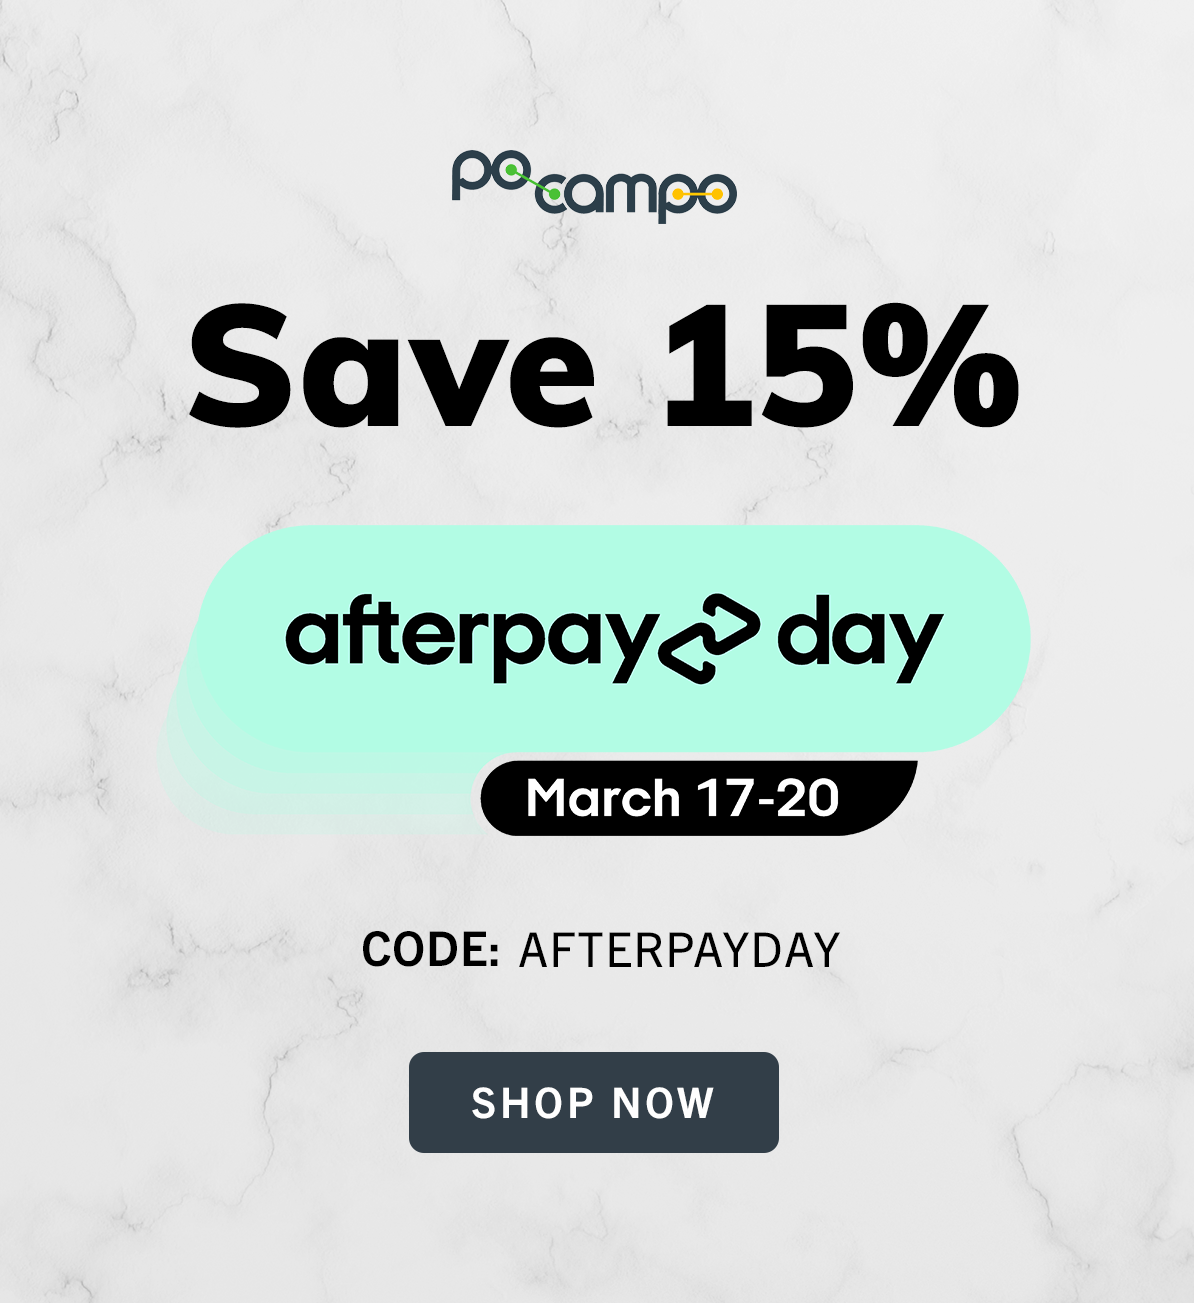 Save 15% on your Po Campo order with code: AFTERPAYDAY. Offer Valid March 17-20.